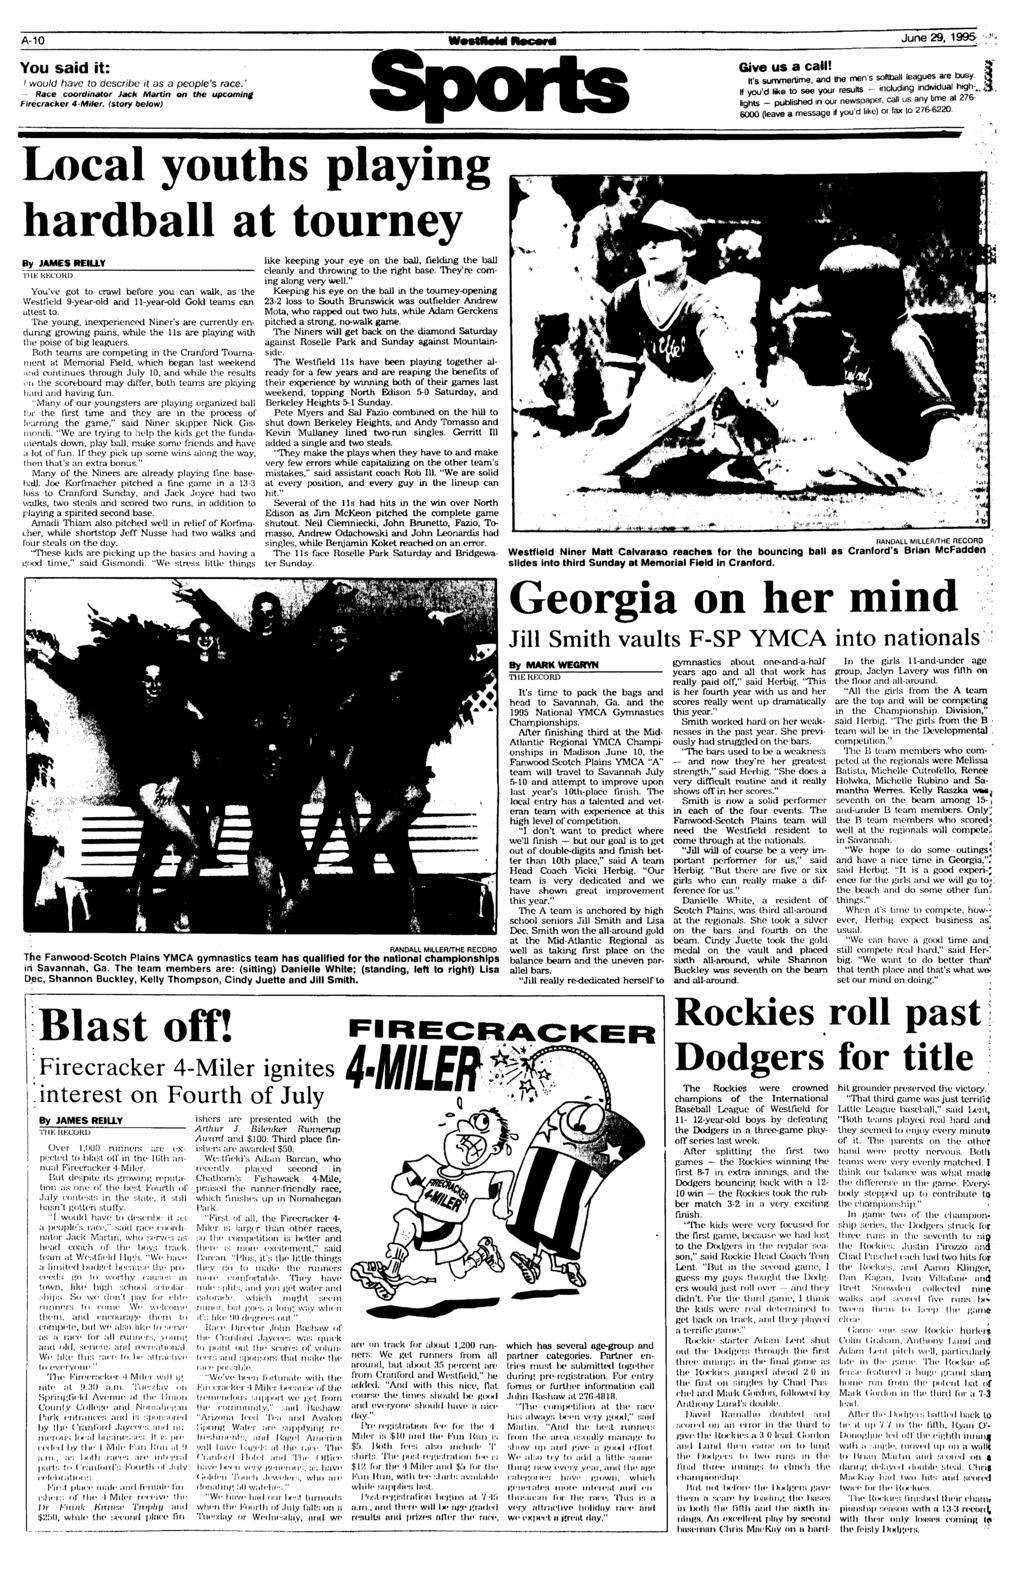 A-10 You said it: would have to describe it as a people's race.' Race coordinator Jack Martin on the upcoming Firecracker 4-Miler. (story below) June 29, 1995 Give us a call!